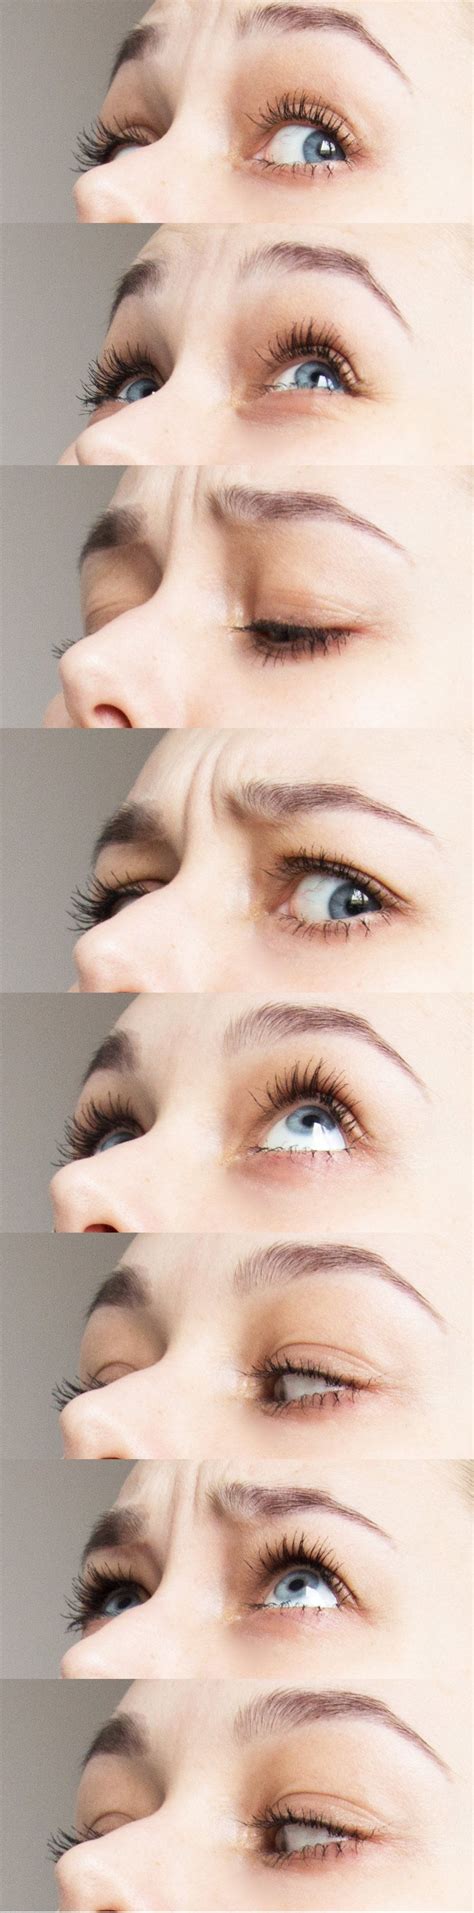 Four Different Views Of The Same Womans Blue Eyes And Eyebrows All